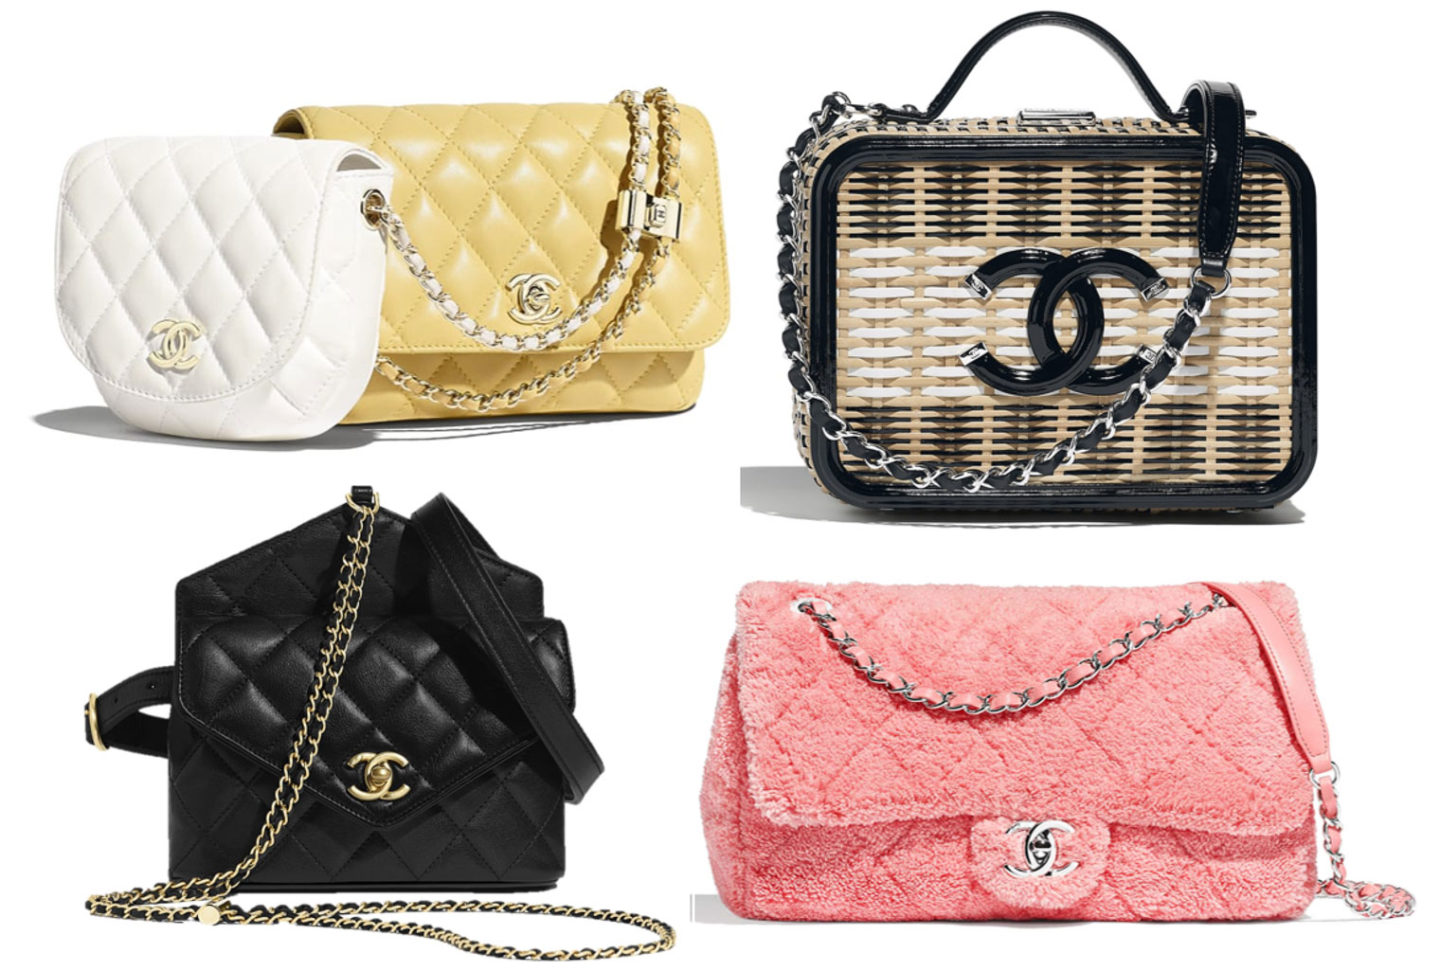 chanel brand bags new